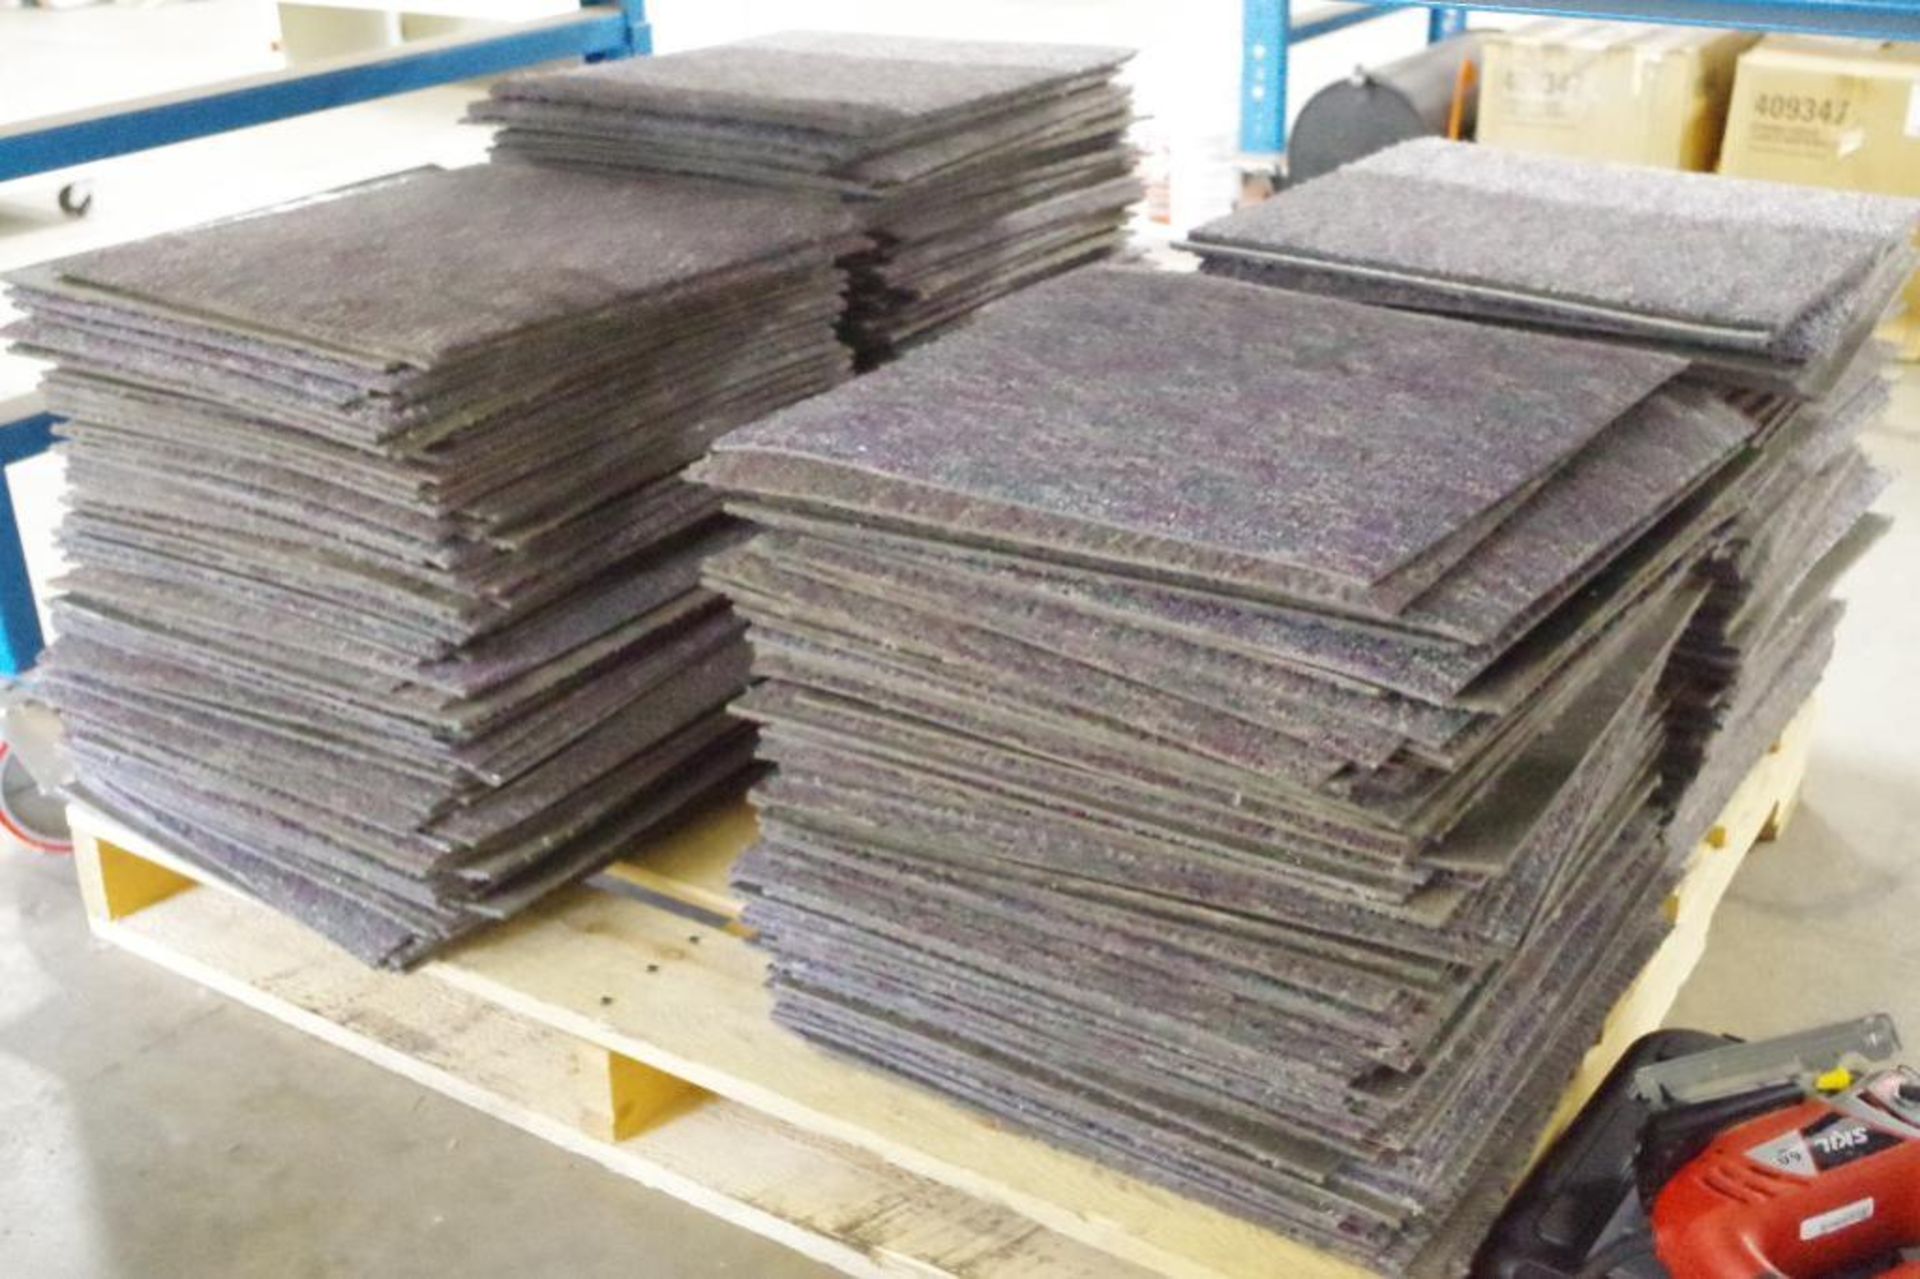 [380+/-] 18"x18" Carpet Squares, Charcoal/Greyish Color, Appear Previously Used/Installed - Image 2 of 2